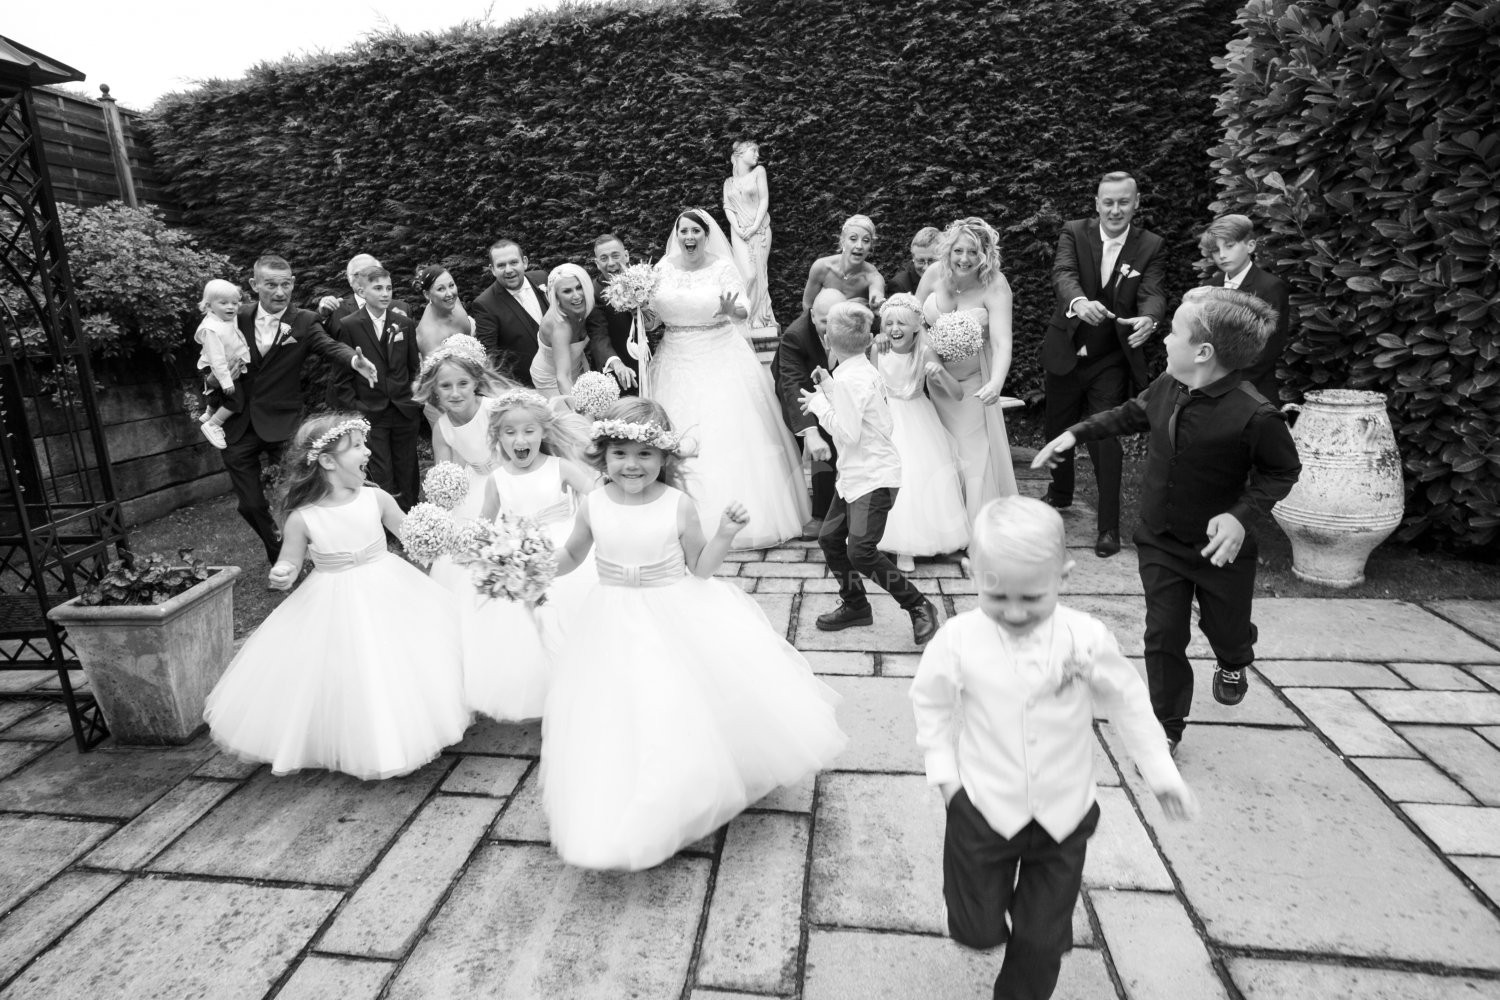 Its just as exciting as Christmas Bridal Party, Flower girl, paige boy, running, wedding photography, Yew Lodge Garden, captcha, black and white photography, reportage